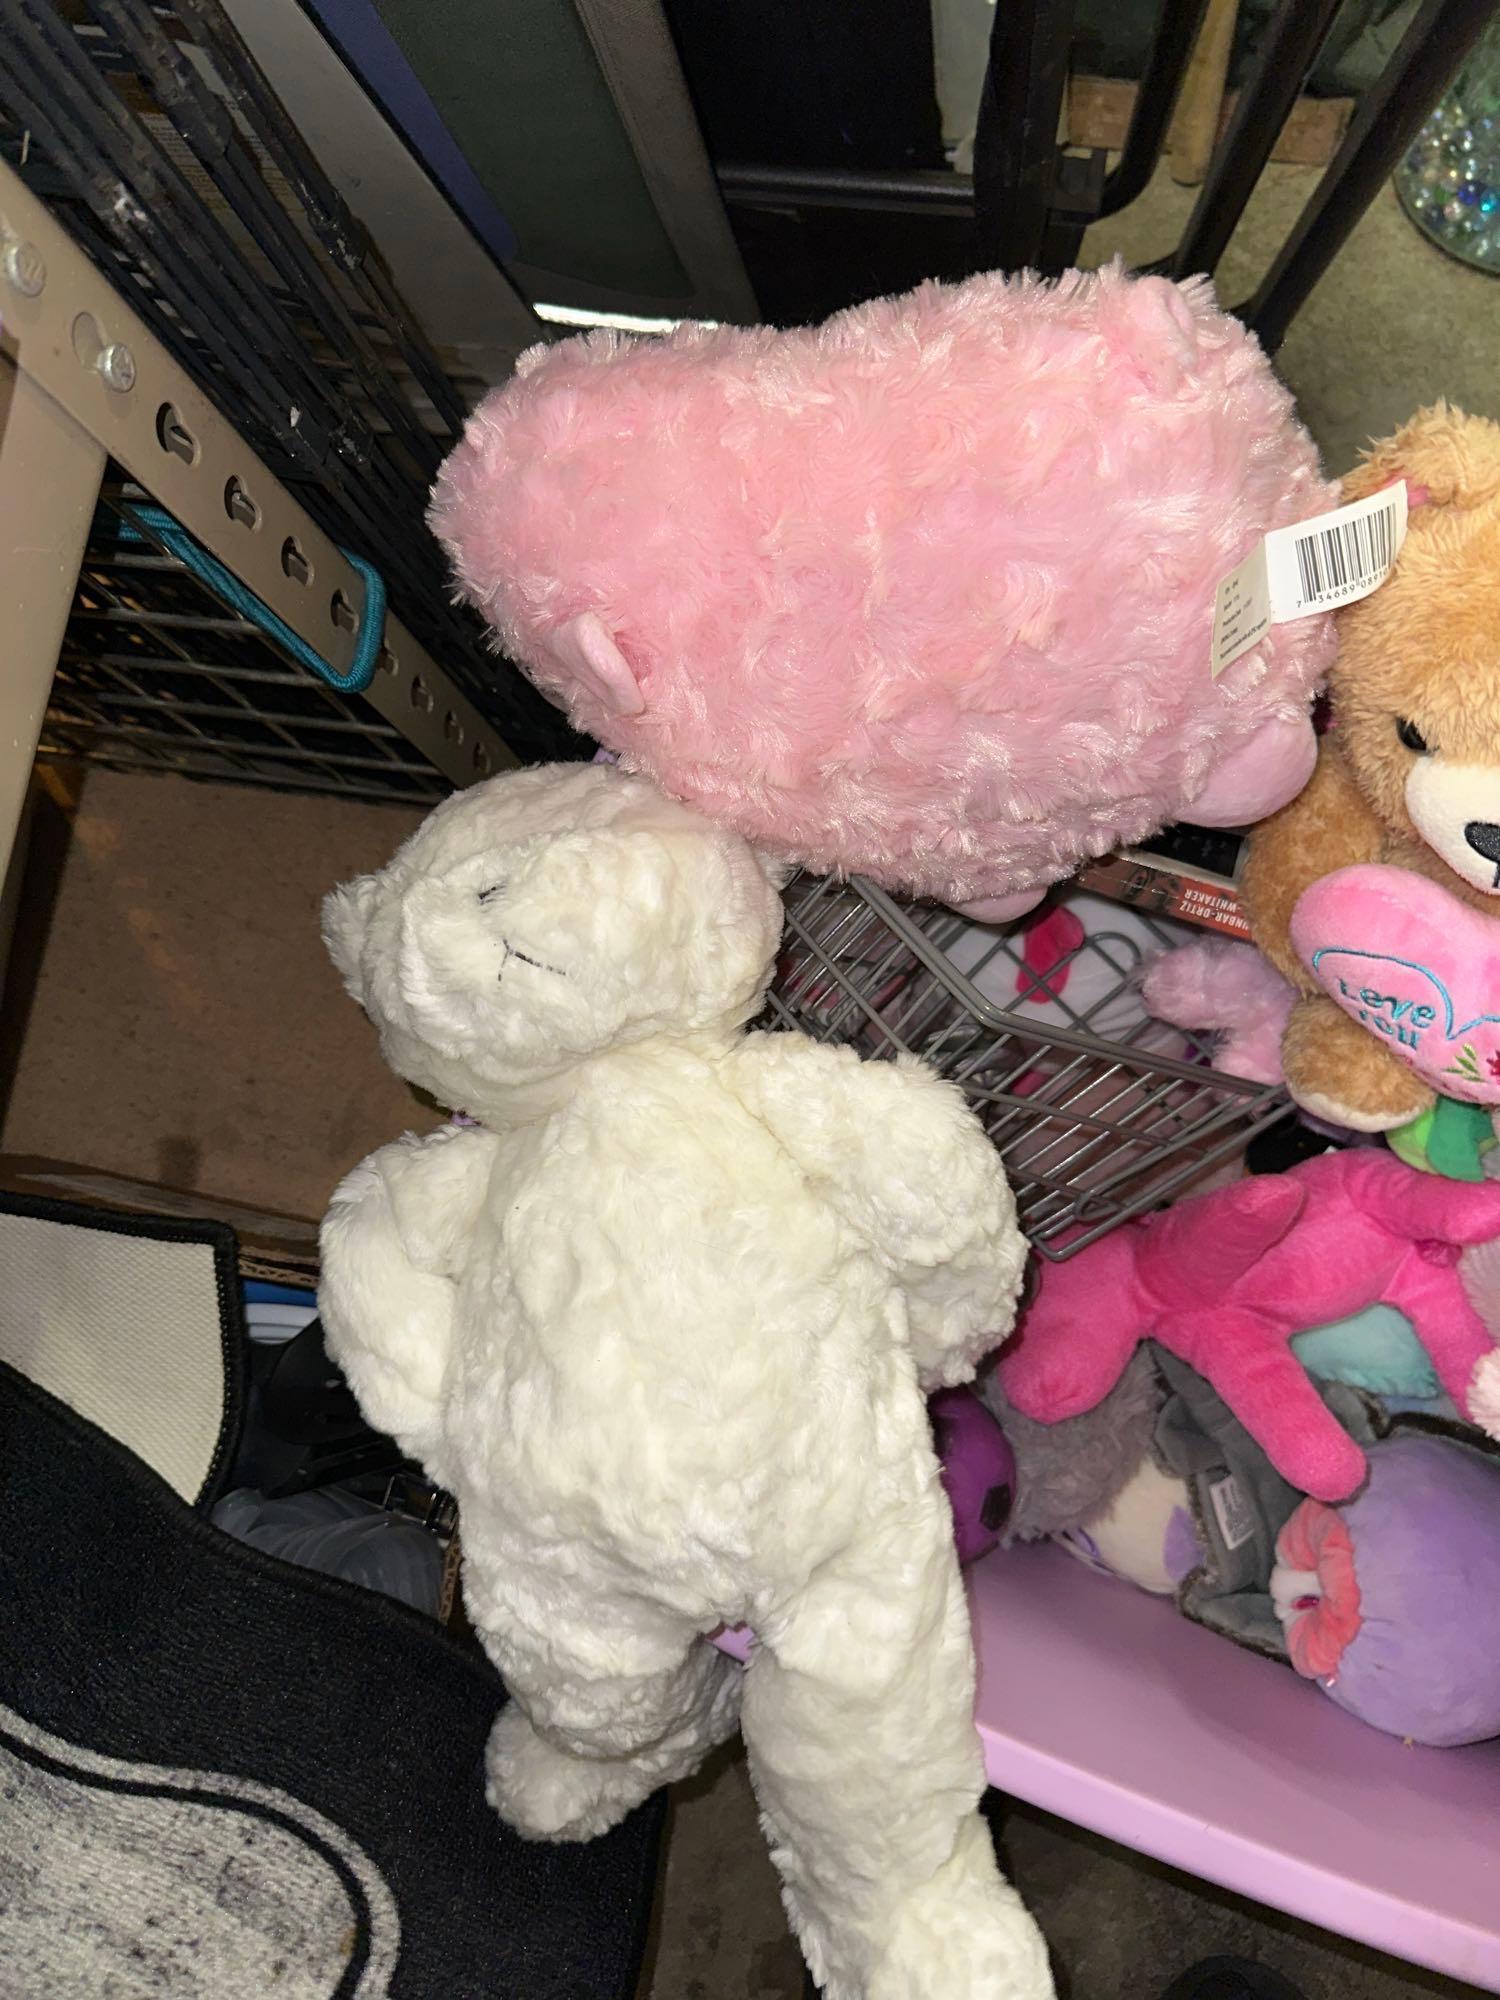 Lot of Squish mellows and Stuffed Animals